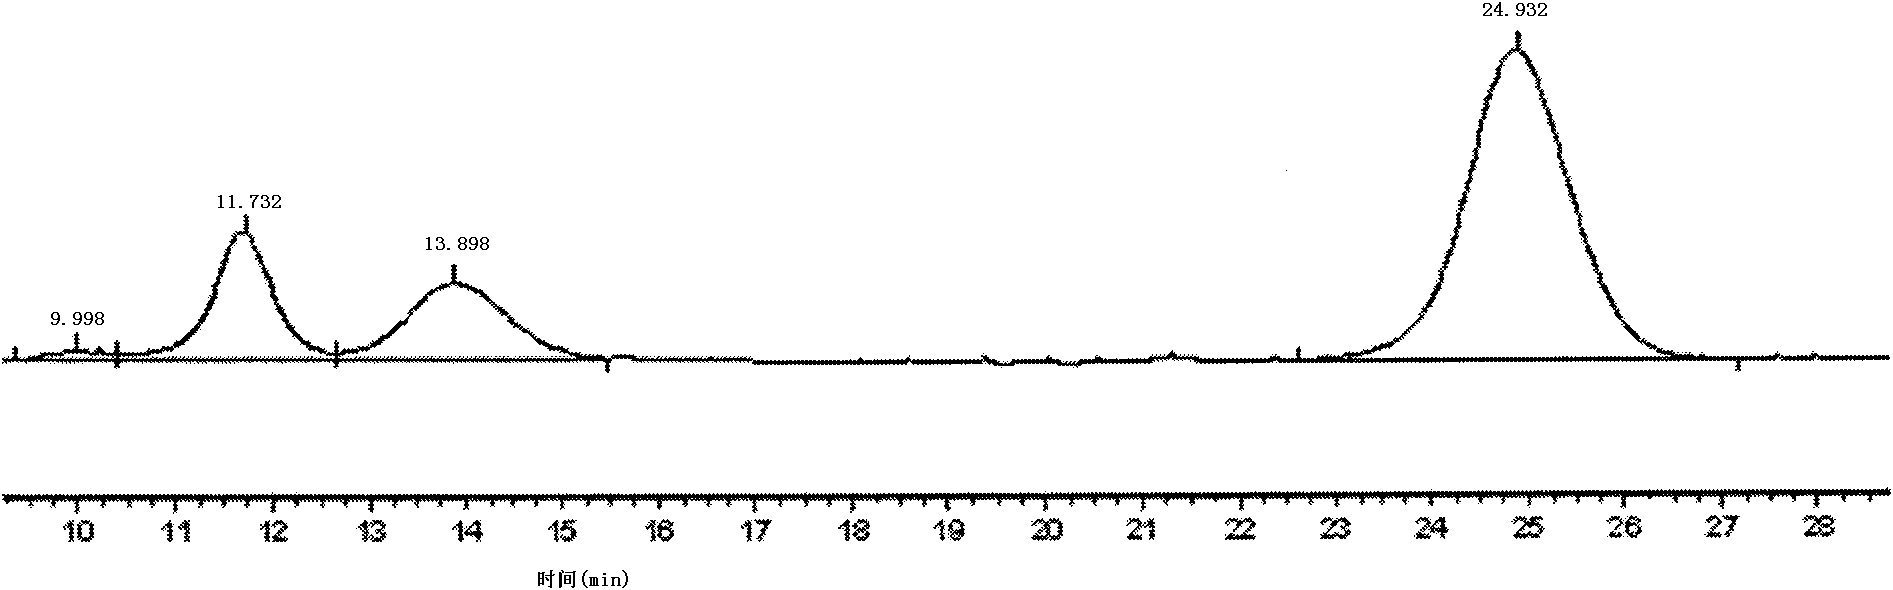 Method for preparing D-tagatose and L-tagatose from dulcitol